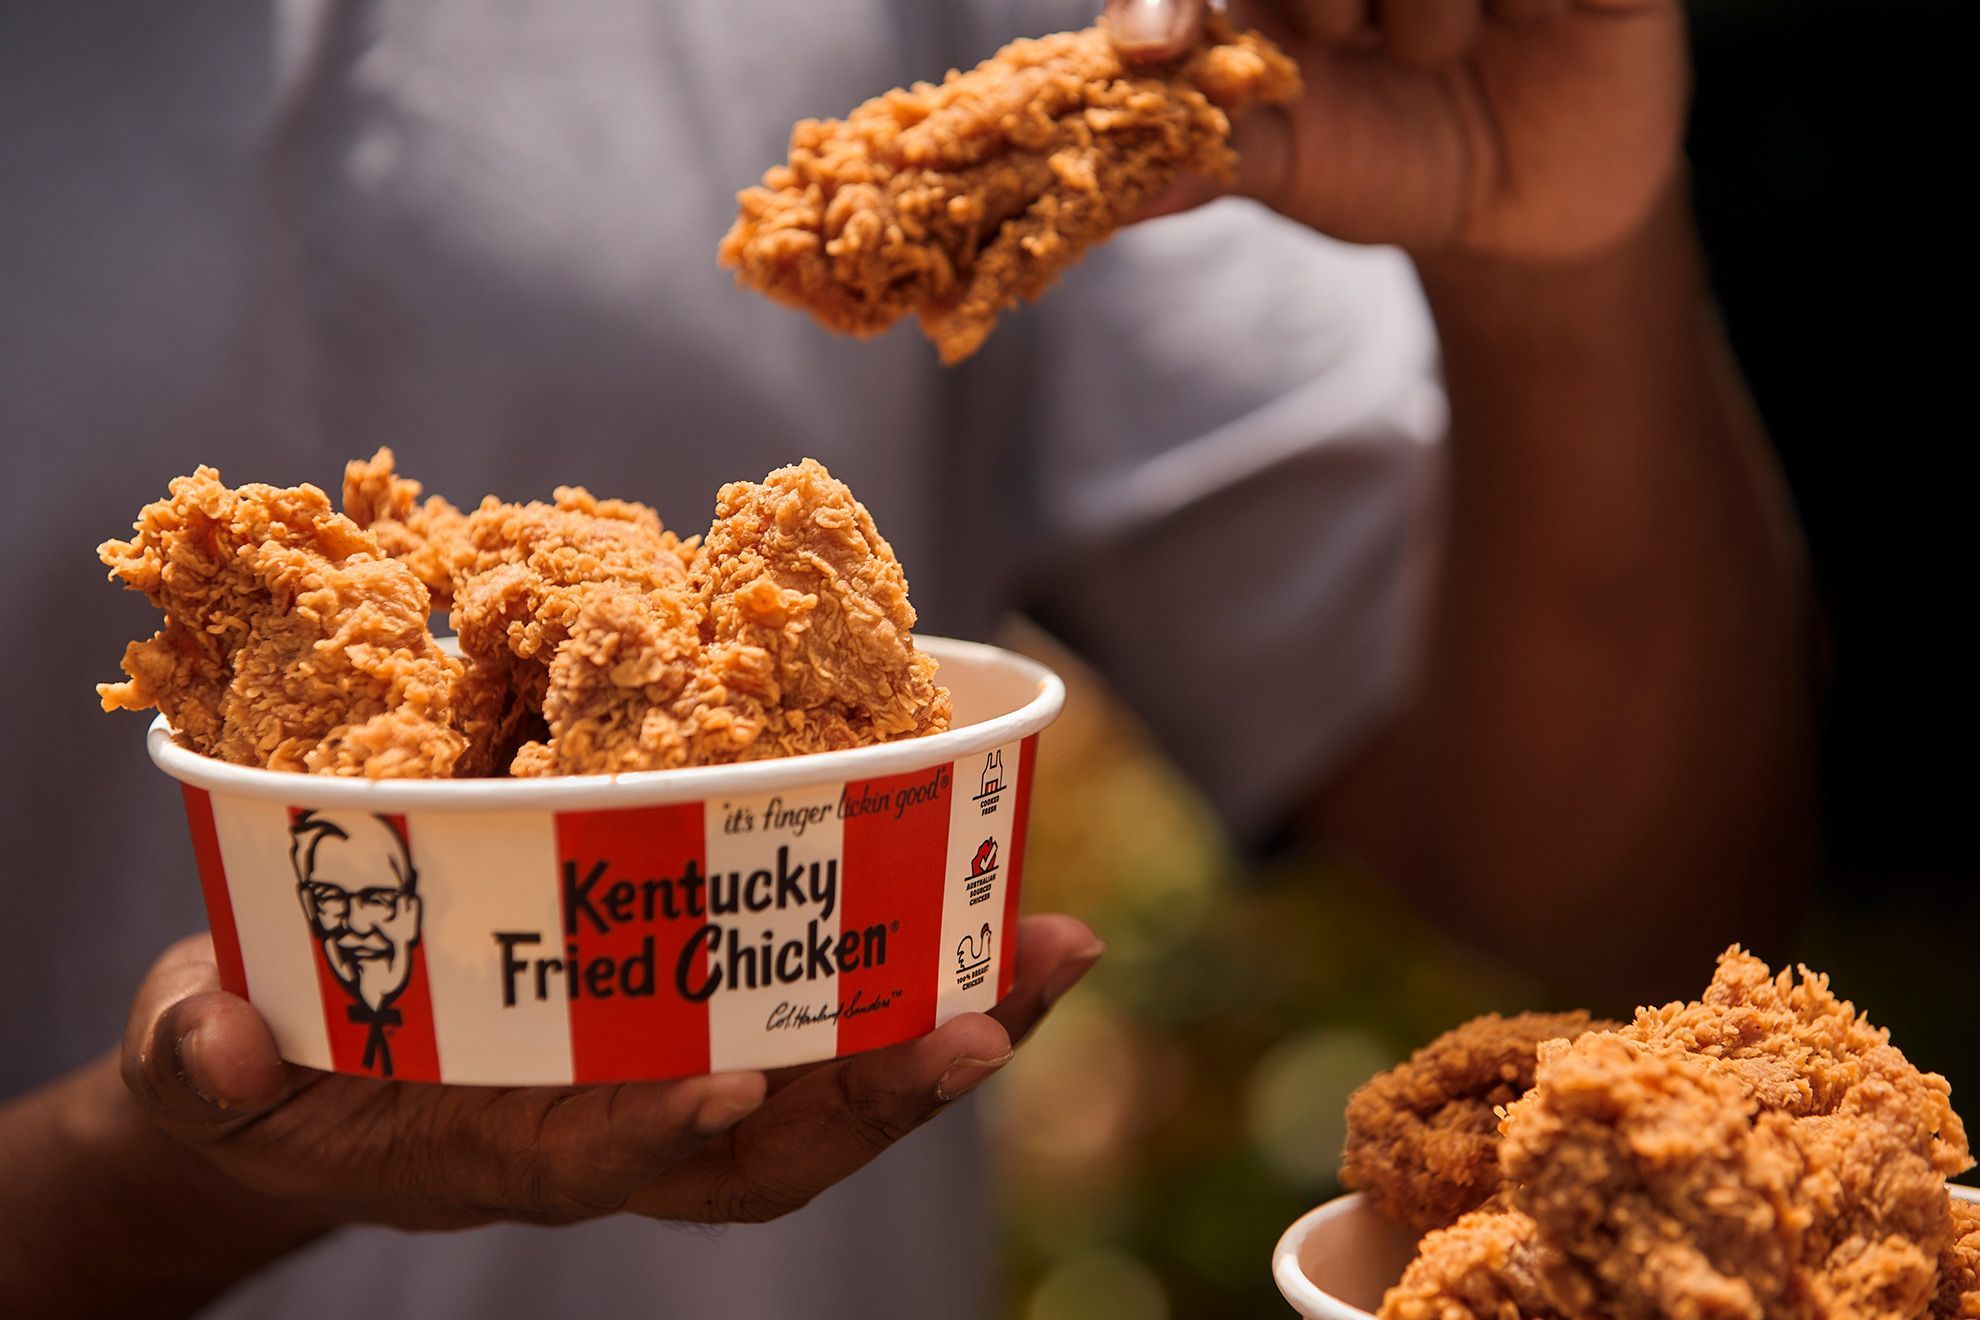 kfc kuwait offer: The Perfect Combo of Flavor and Value